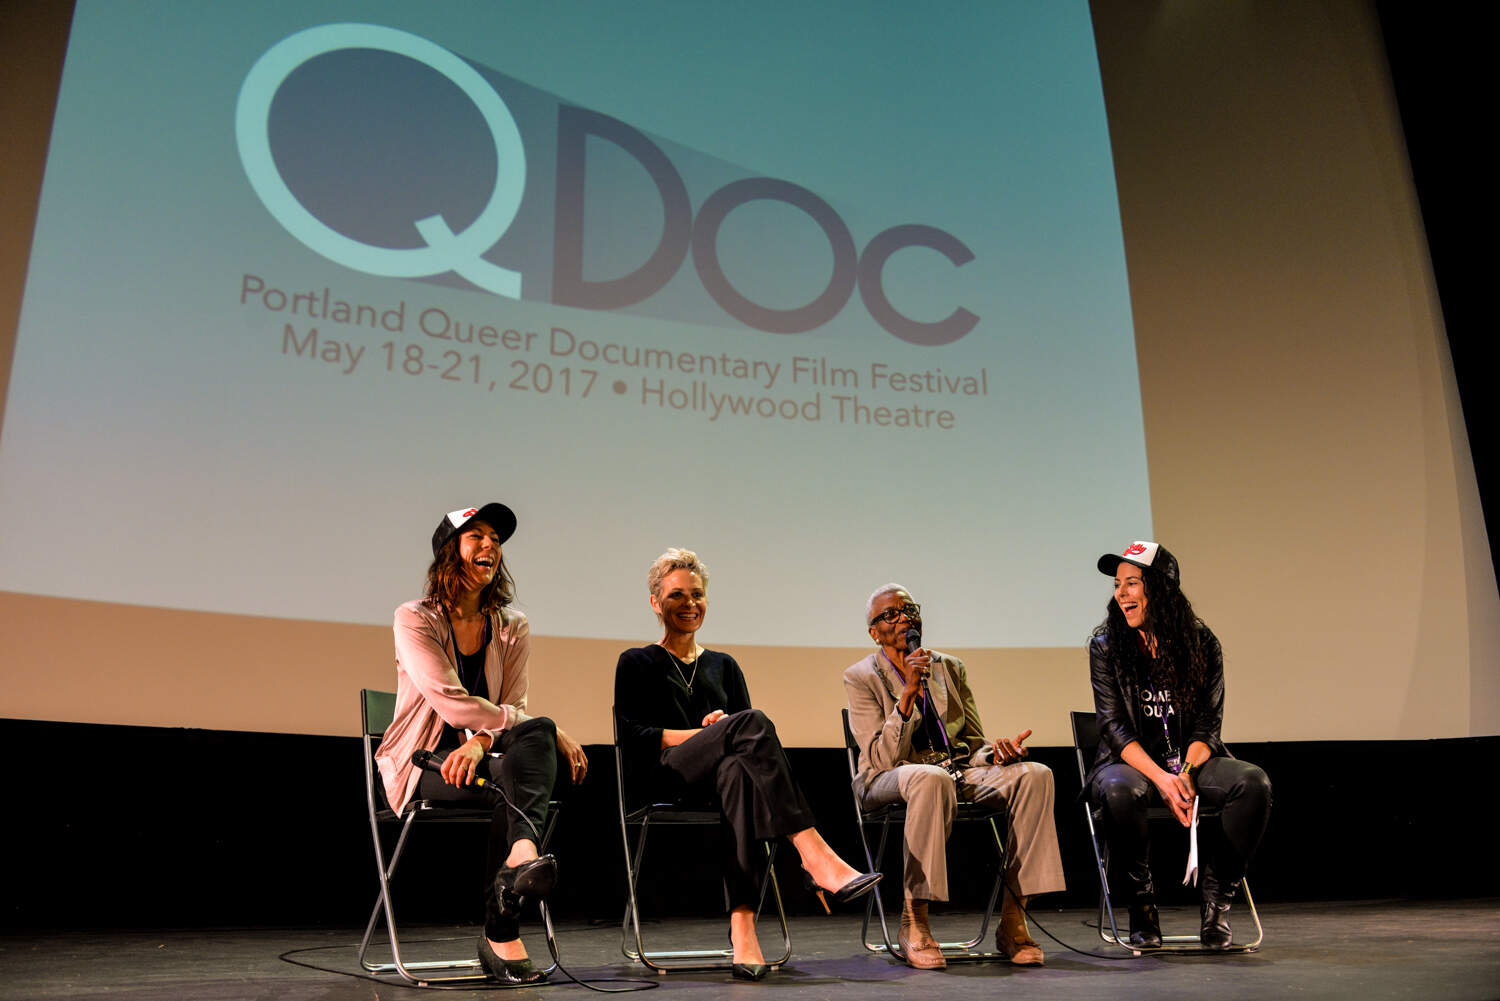 A Q&A after a 2017 screening of 'Jewel's Catch One' at QDoc, featuring, from left to right, Deb Kemp, C. Fitz, Jewel Thais Williams and Molly King. Courtesy of QDoc.